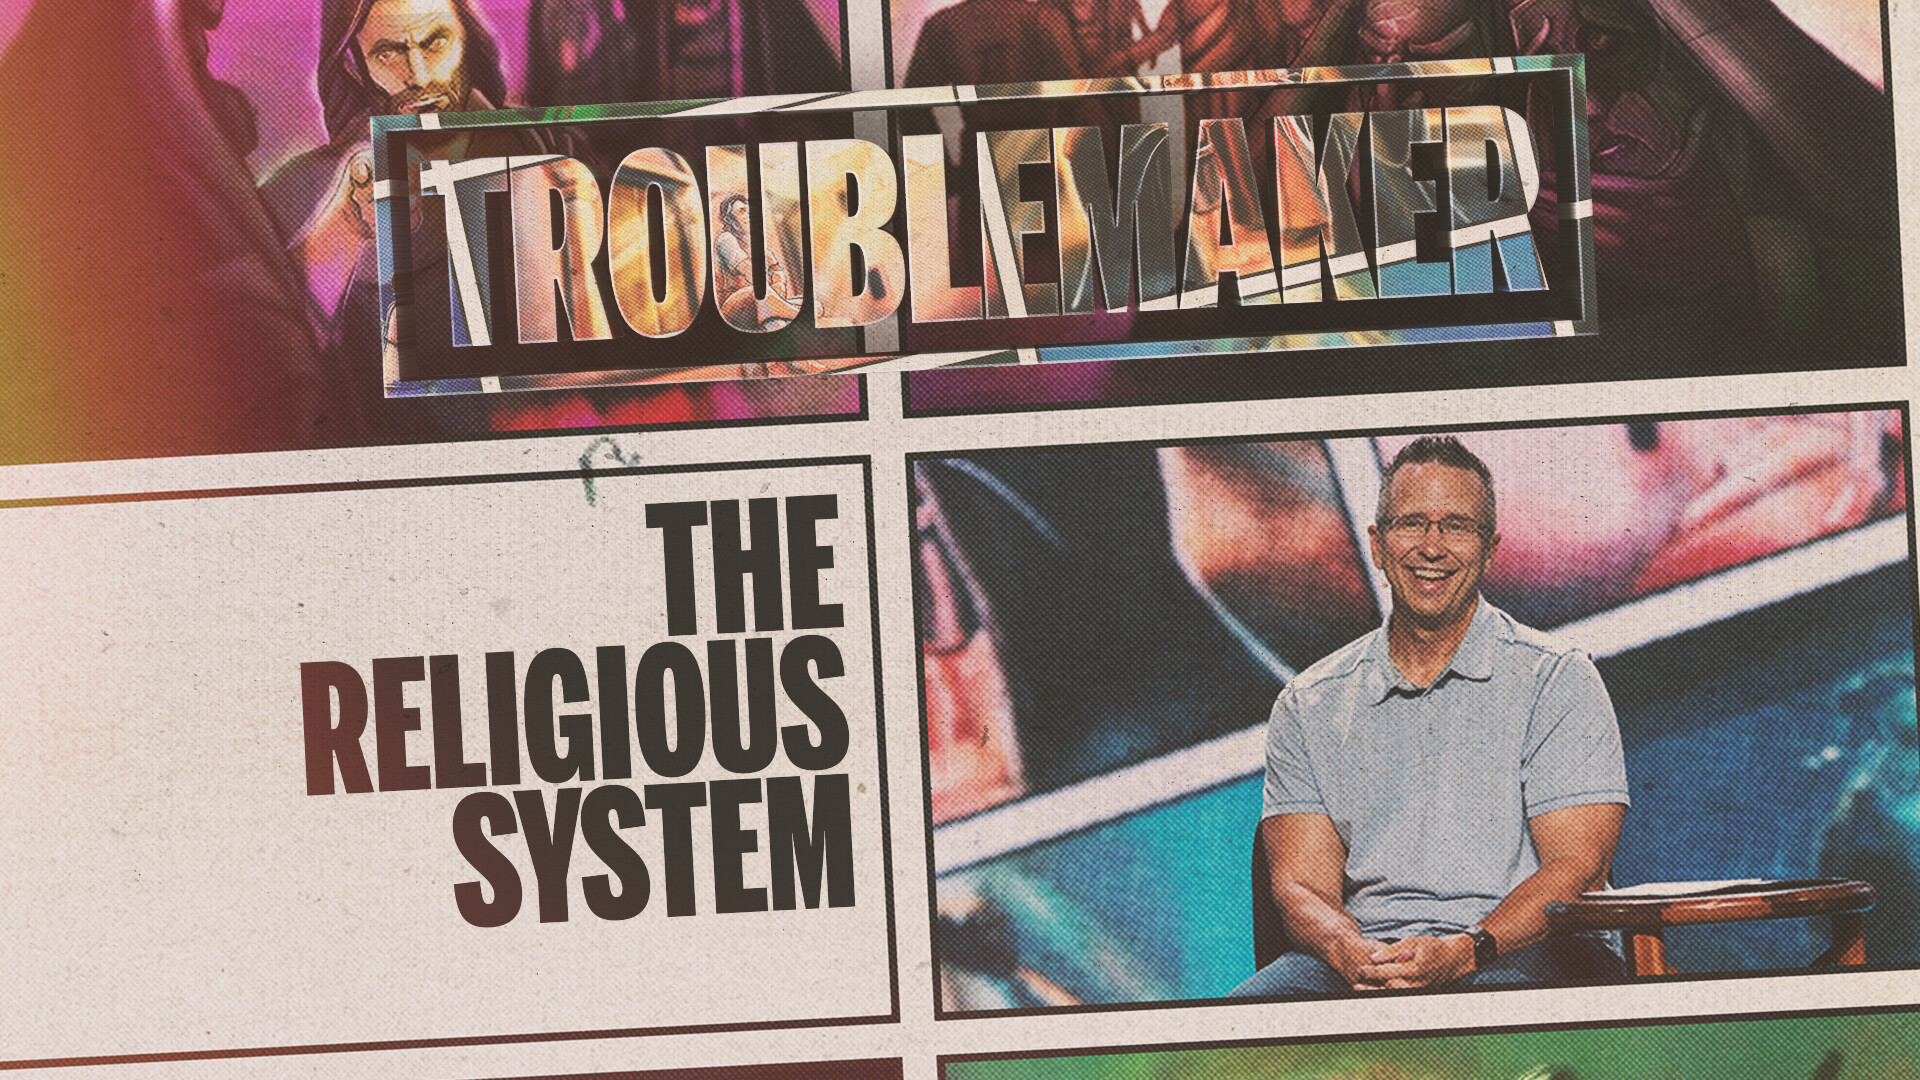 Watch Troublemaker - The Religious System